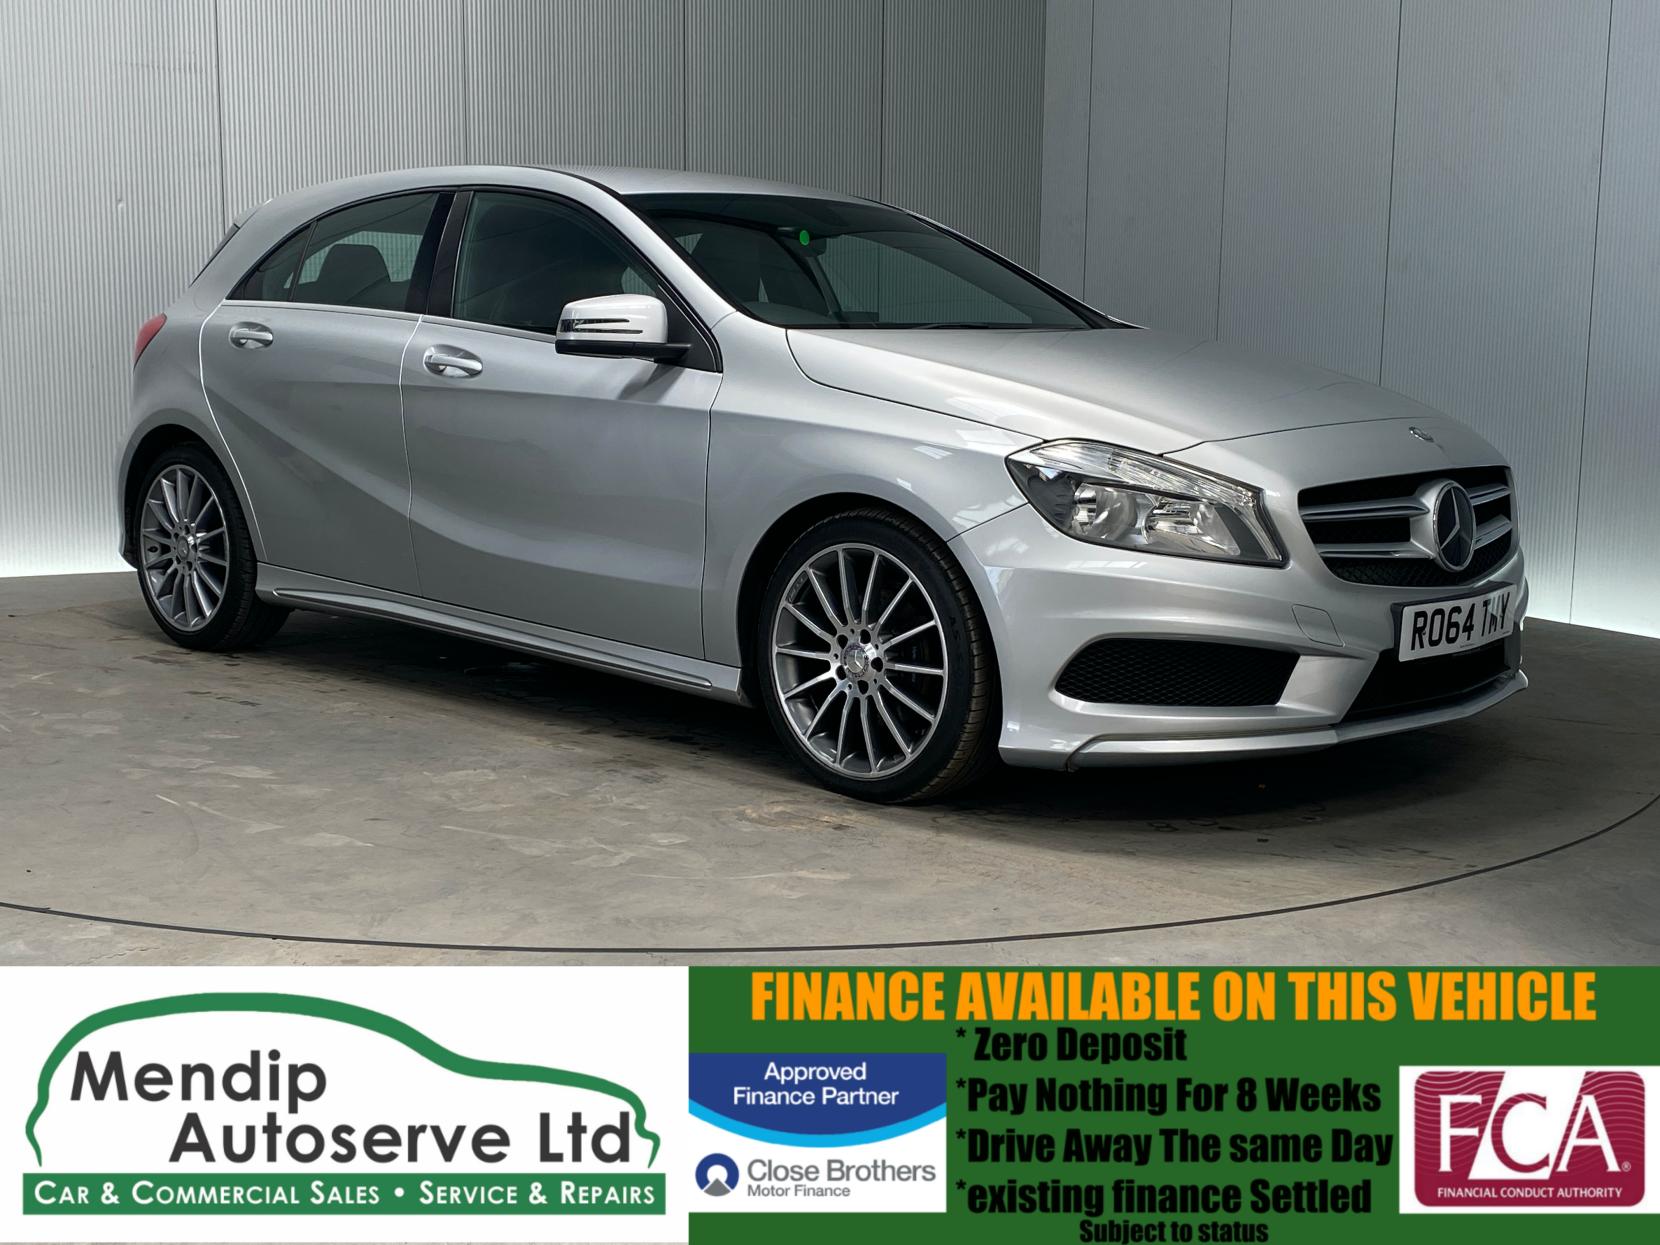 Mercedes-Benz A Class 1.5 A180 CDI AMG Sport Hatchback 5dr Diesel Manual Euro 6 (s/s) (109 ps)